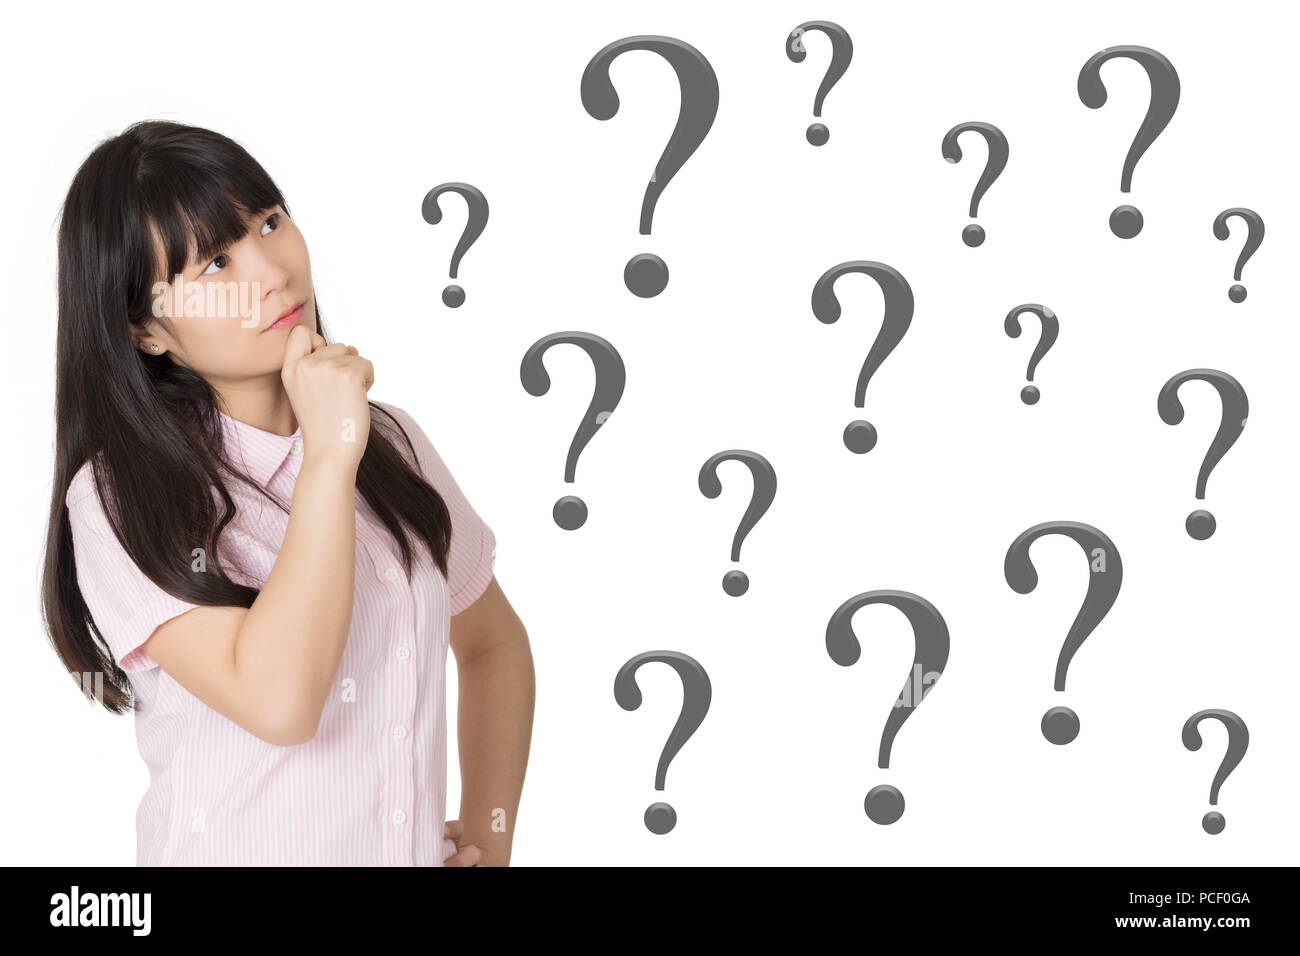 Portrait of a Beautiful Chinese American woman deep in thought with question marks isolated on a white background Stock Photo